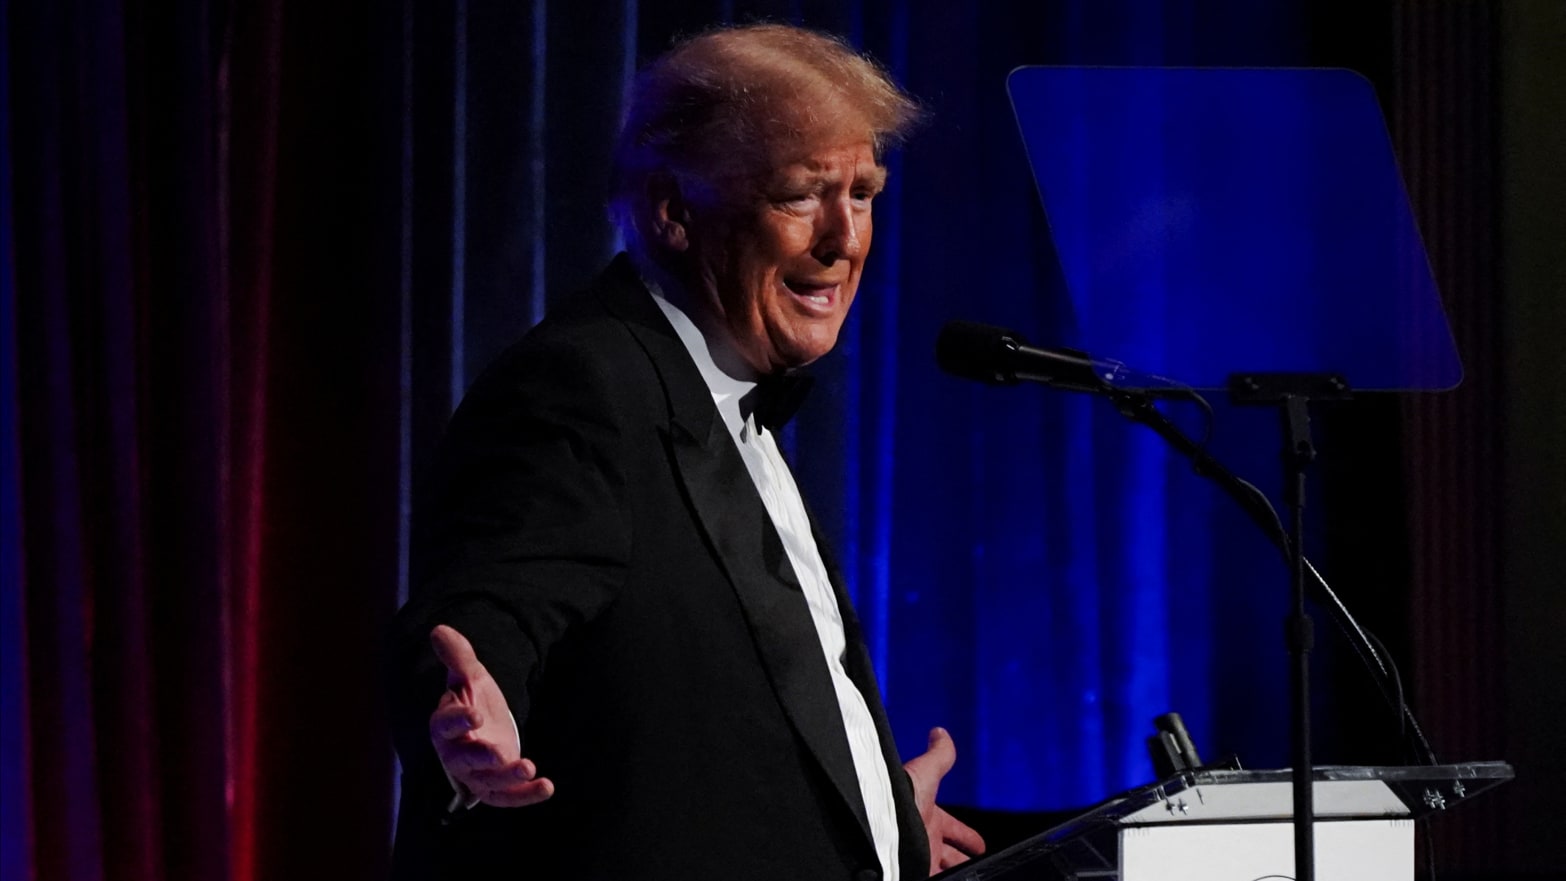 Former U.S. President Donald Trump addresses attendees at the New York Young Republican Club's Annual Gala